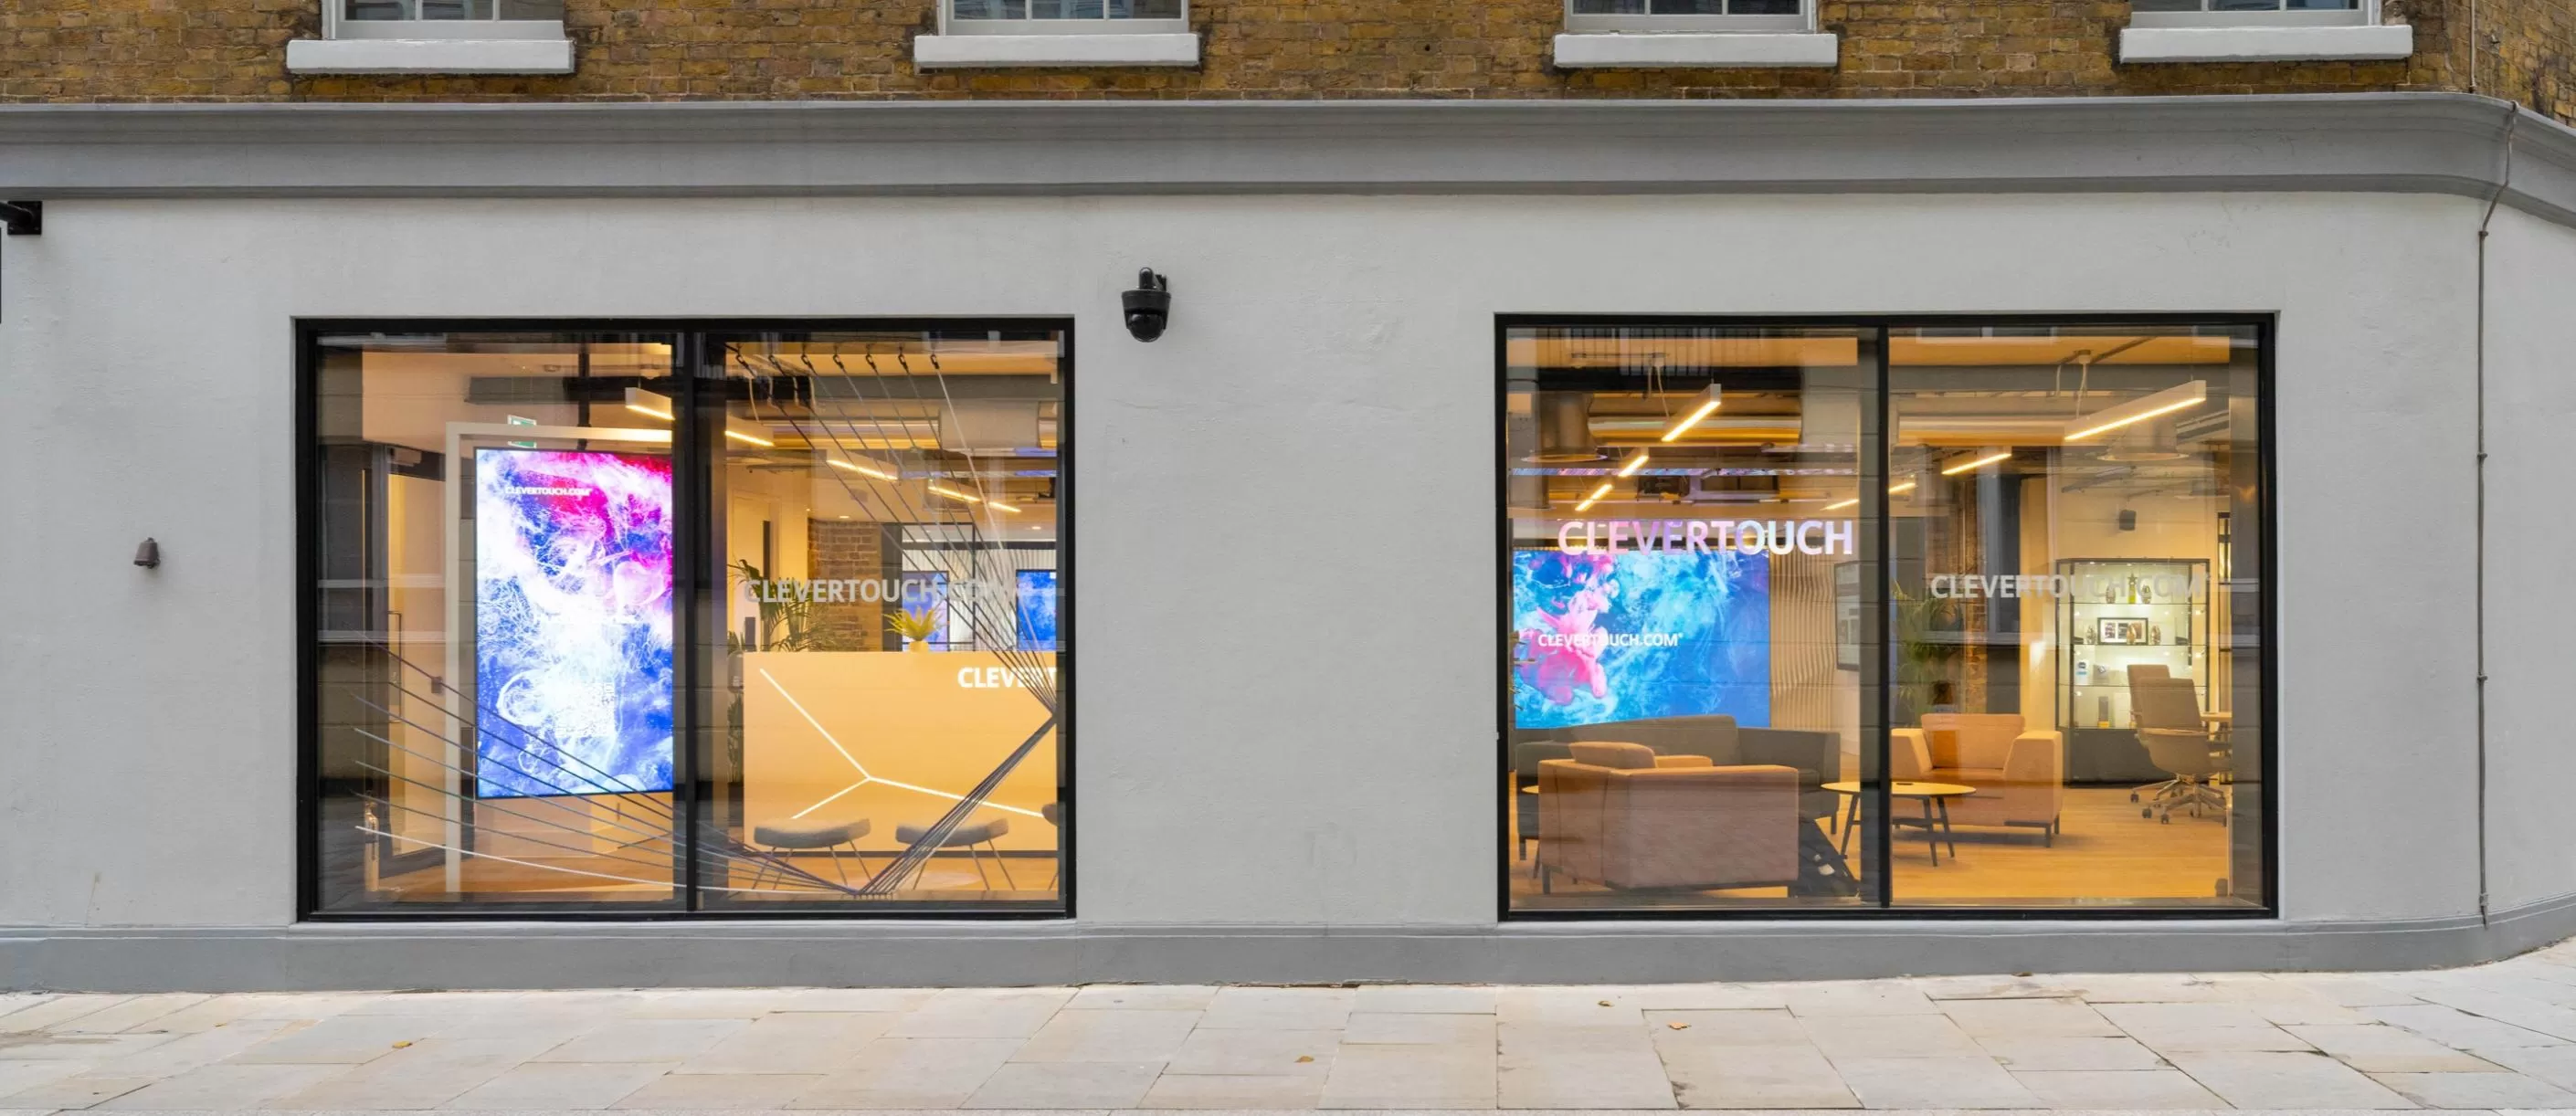 Clevertouch gallery from street view. Digital signage viewable from the windows